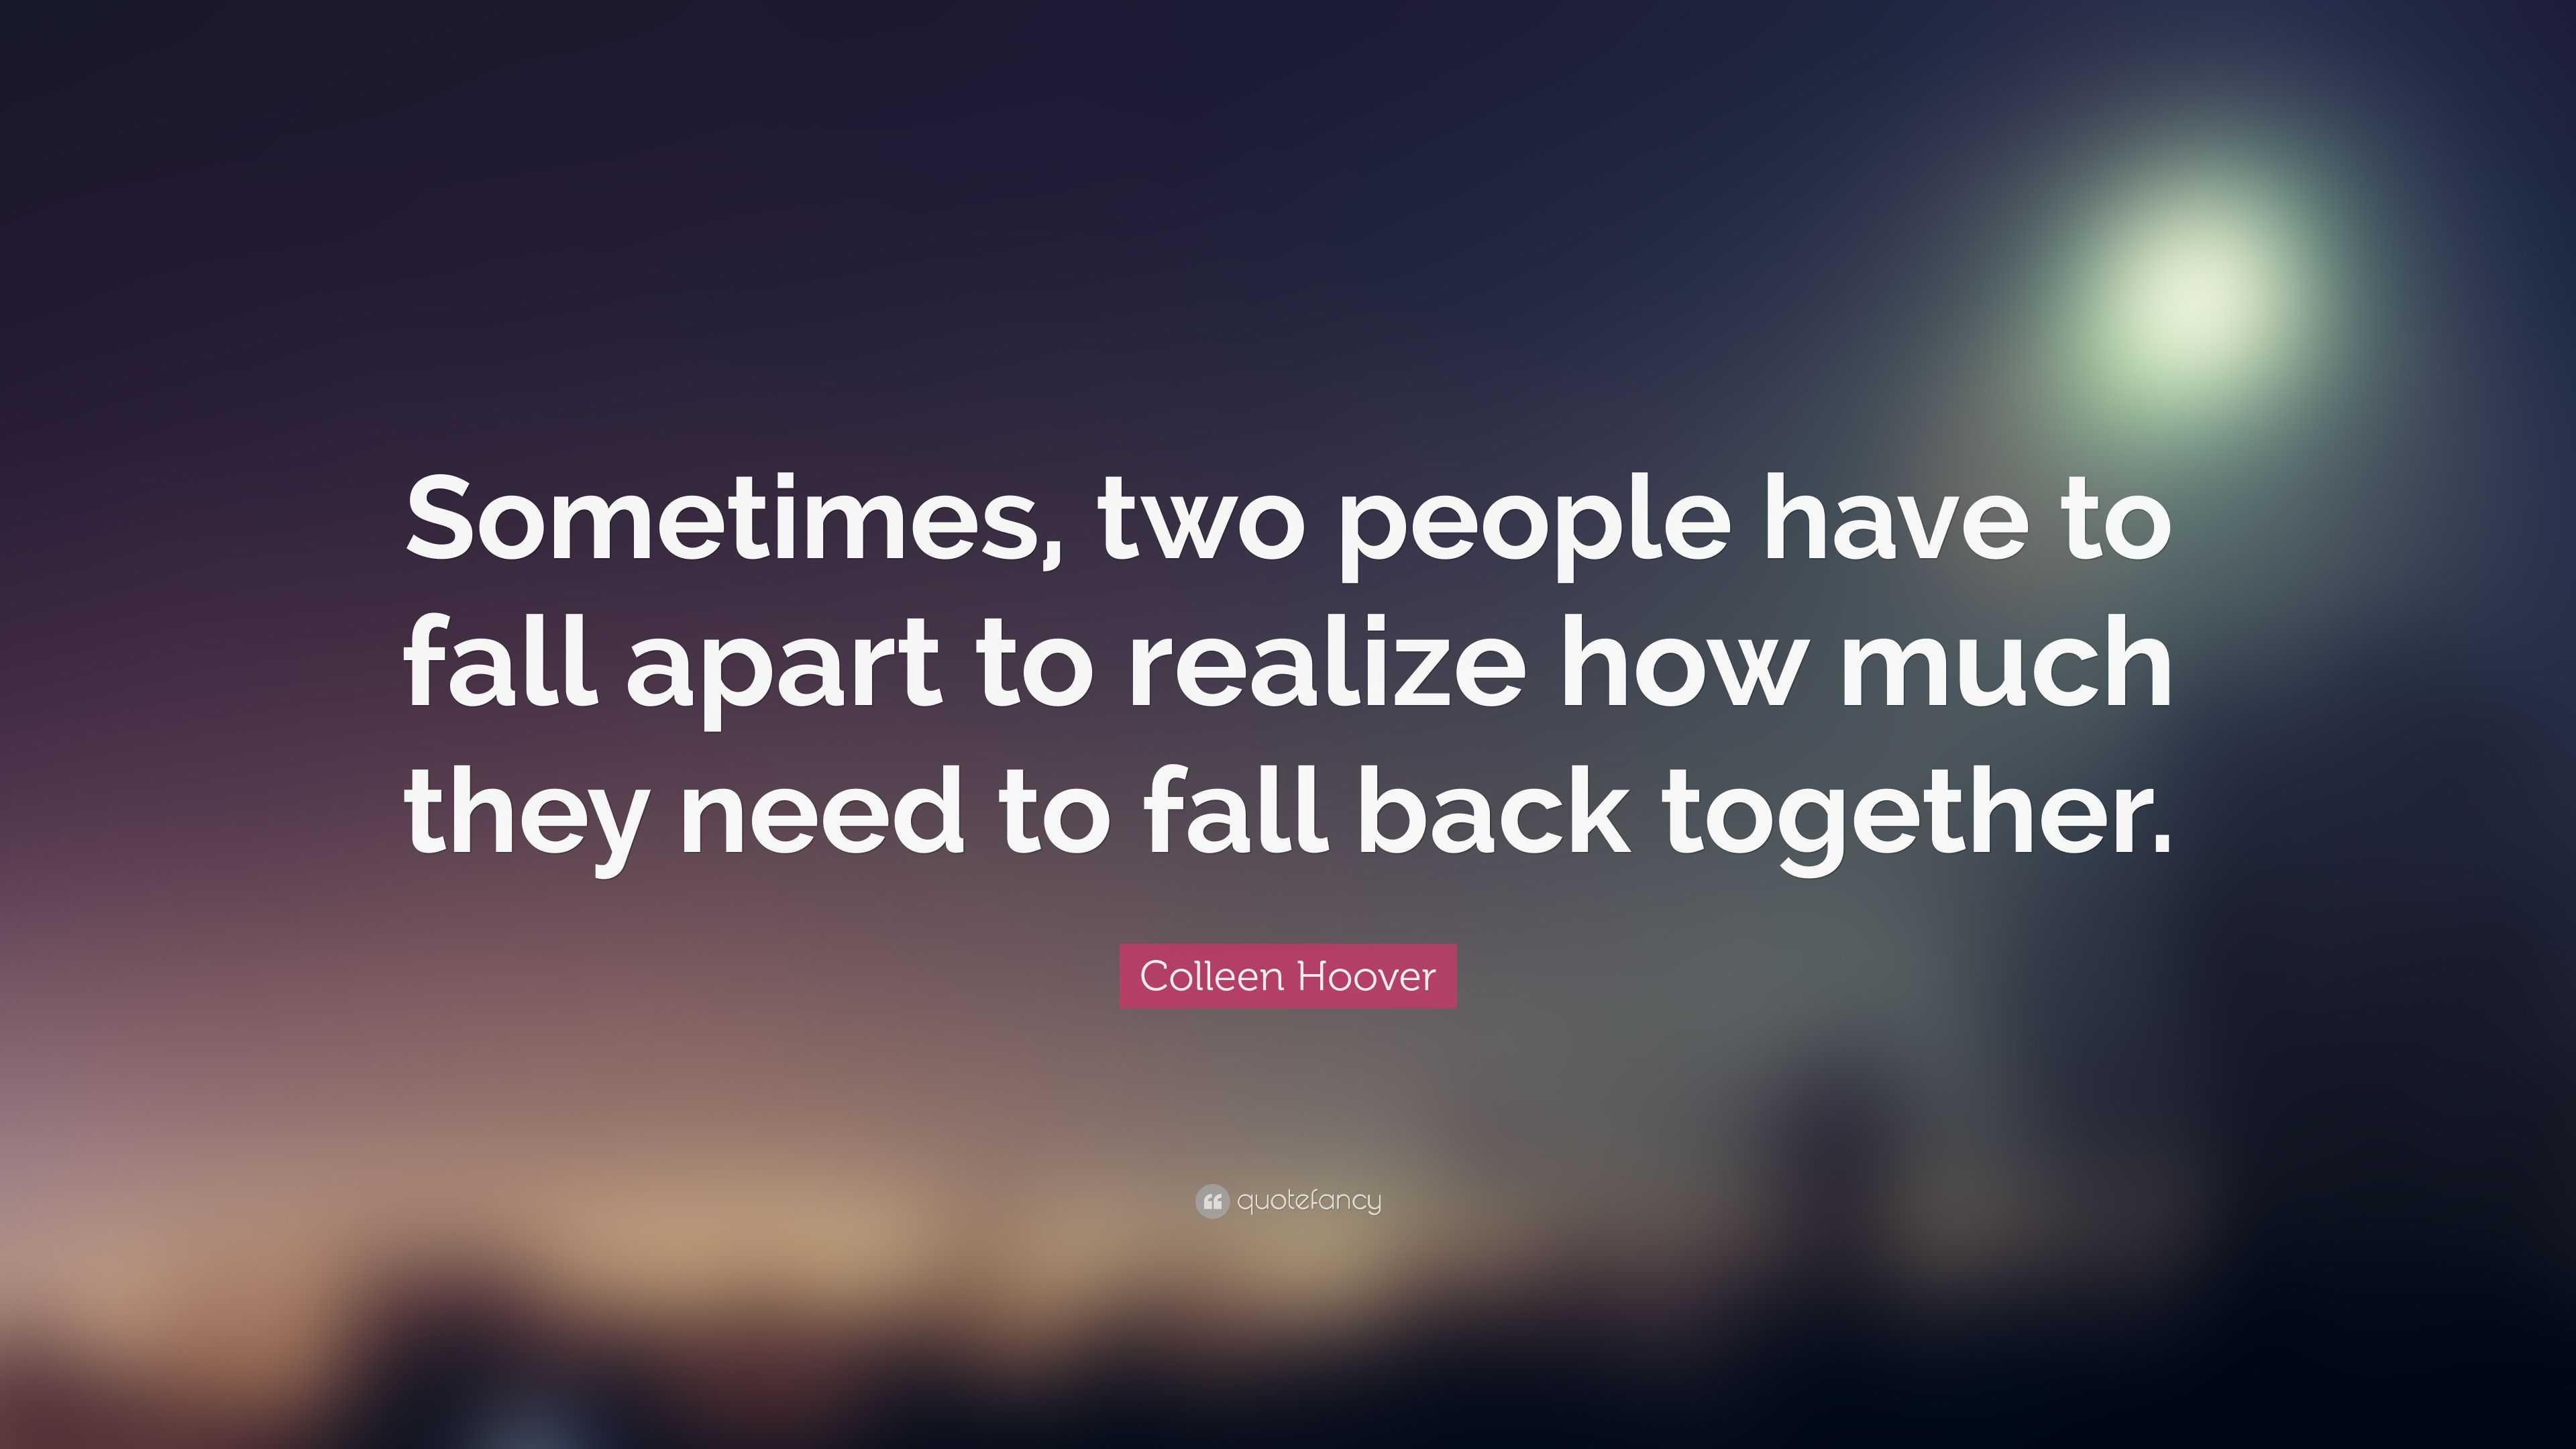 Colleen Hoover Quote: “Sometimes, two people have to fall apart to